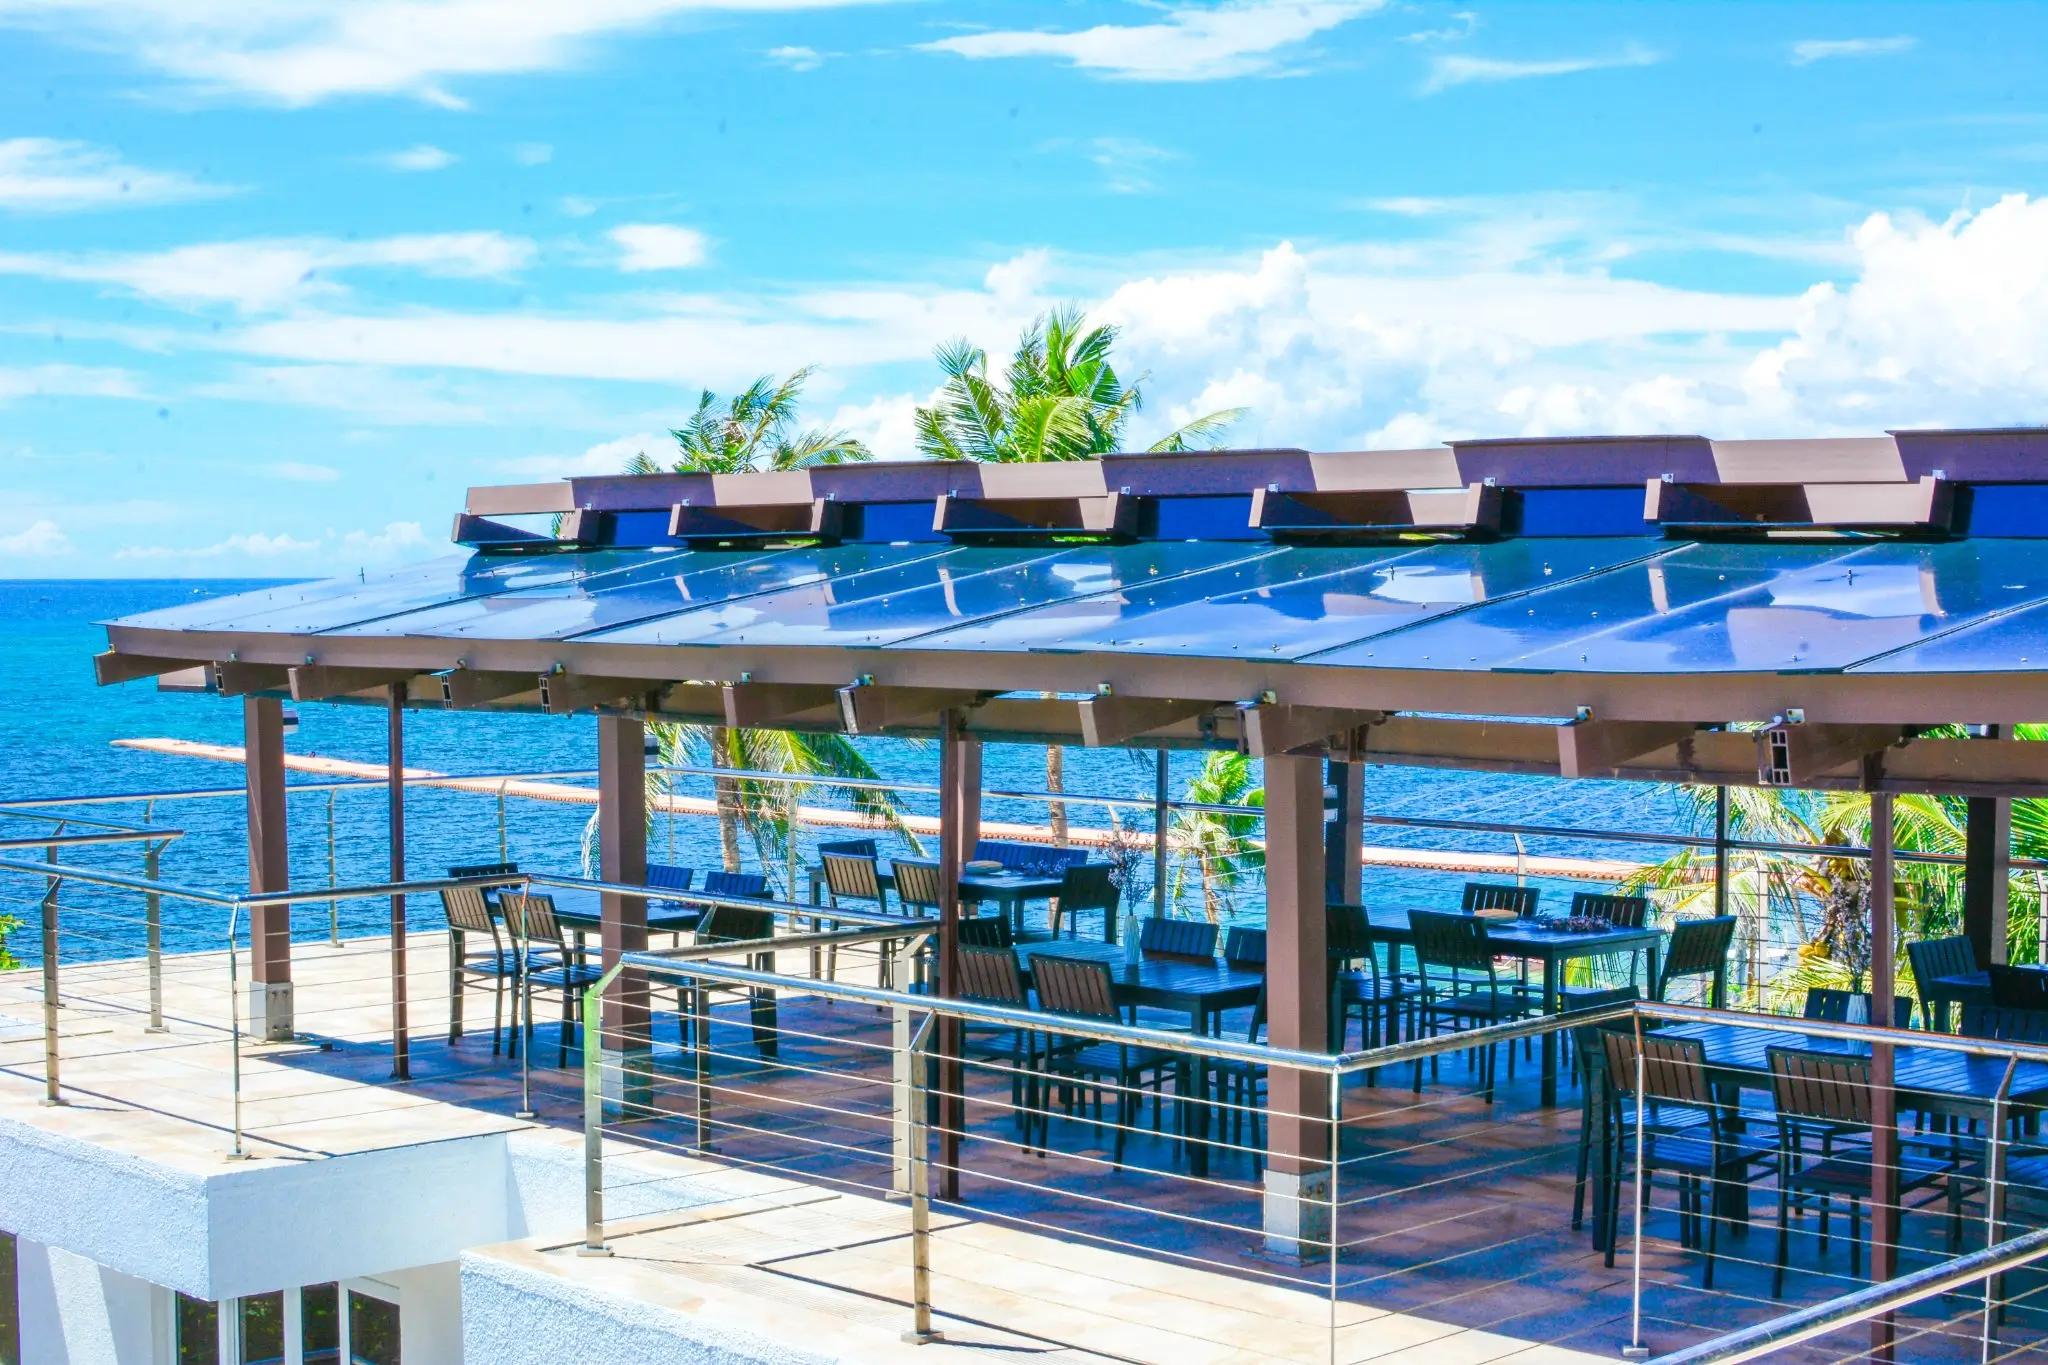 Open rooftop dining area at Aira Boracay, a boutique resort in Boracay, offering unobstructed views of the ocean. The area is equipped with modern furniture under stylish pergolas, ideal for a seaside dining experience.